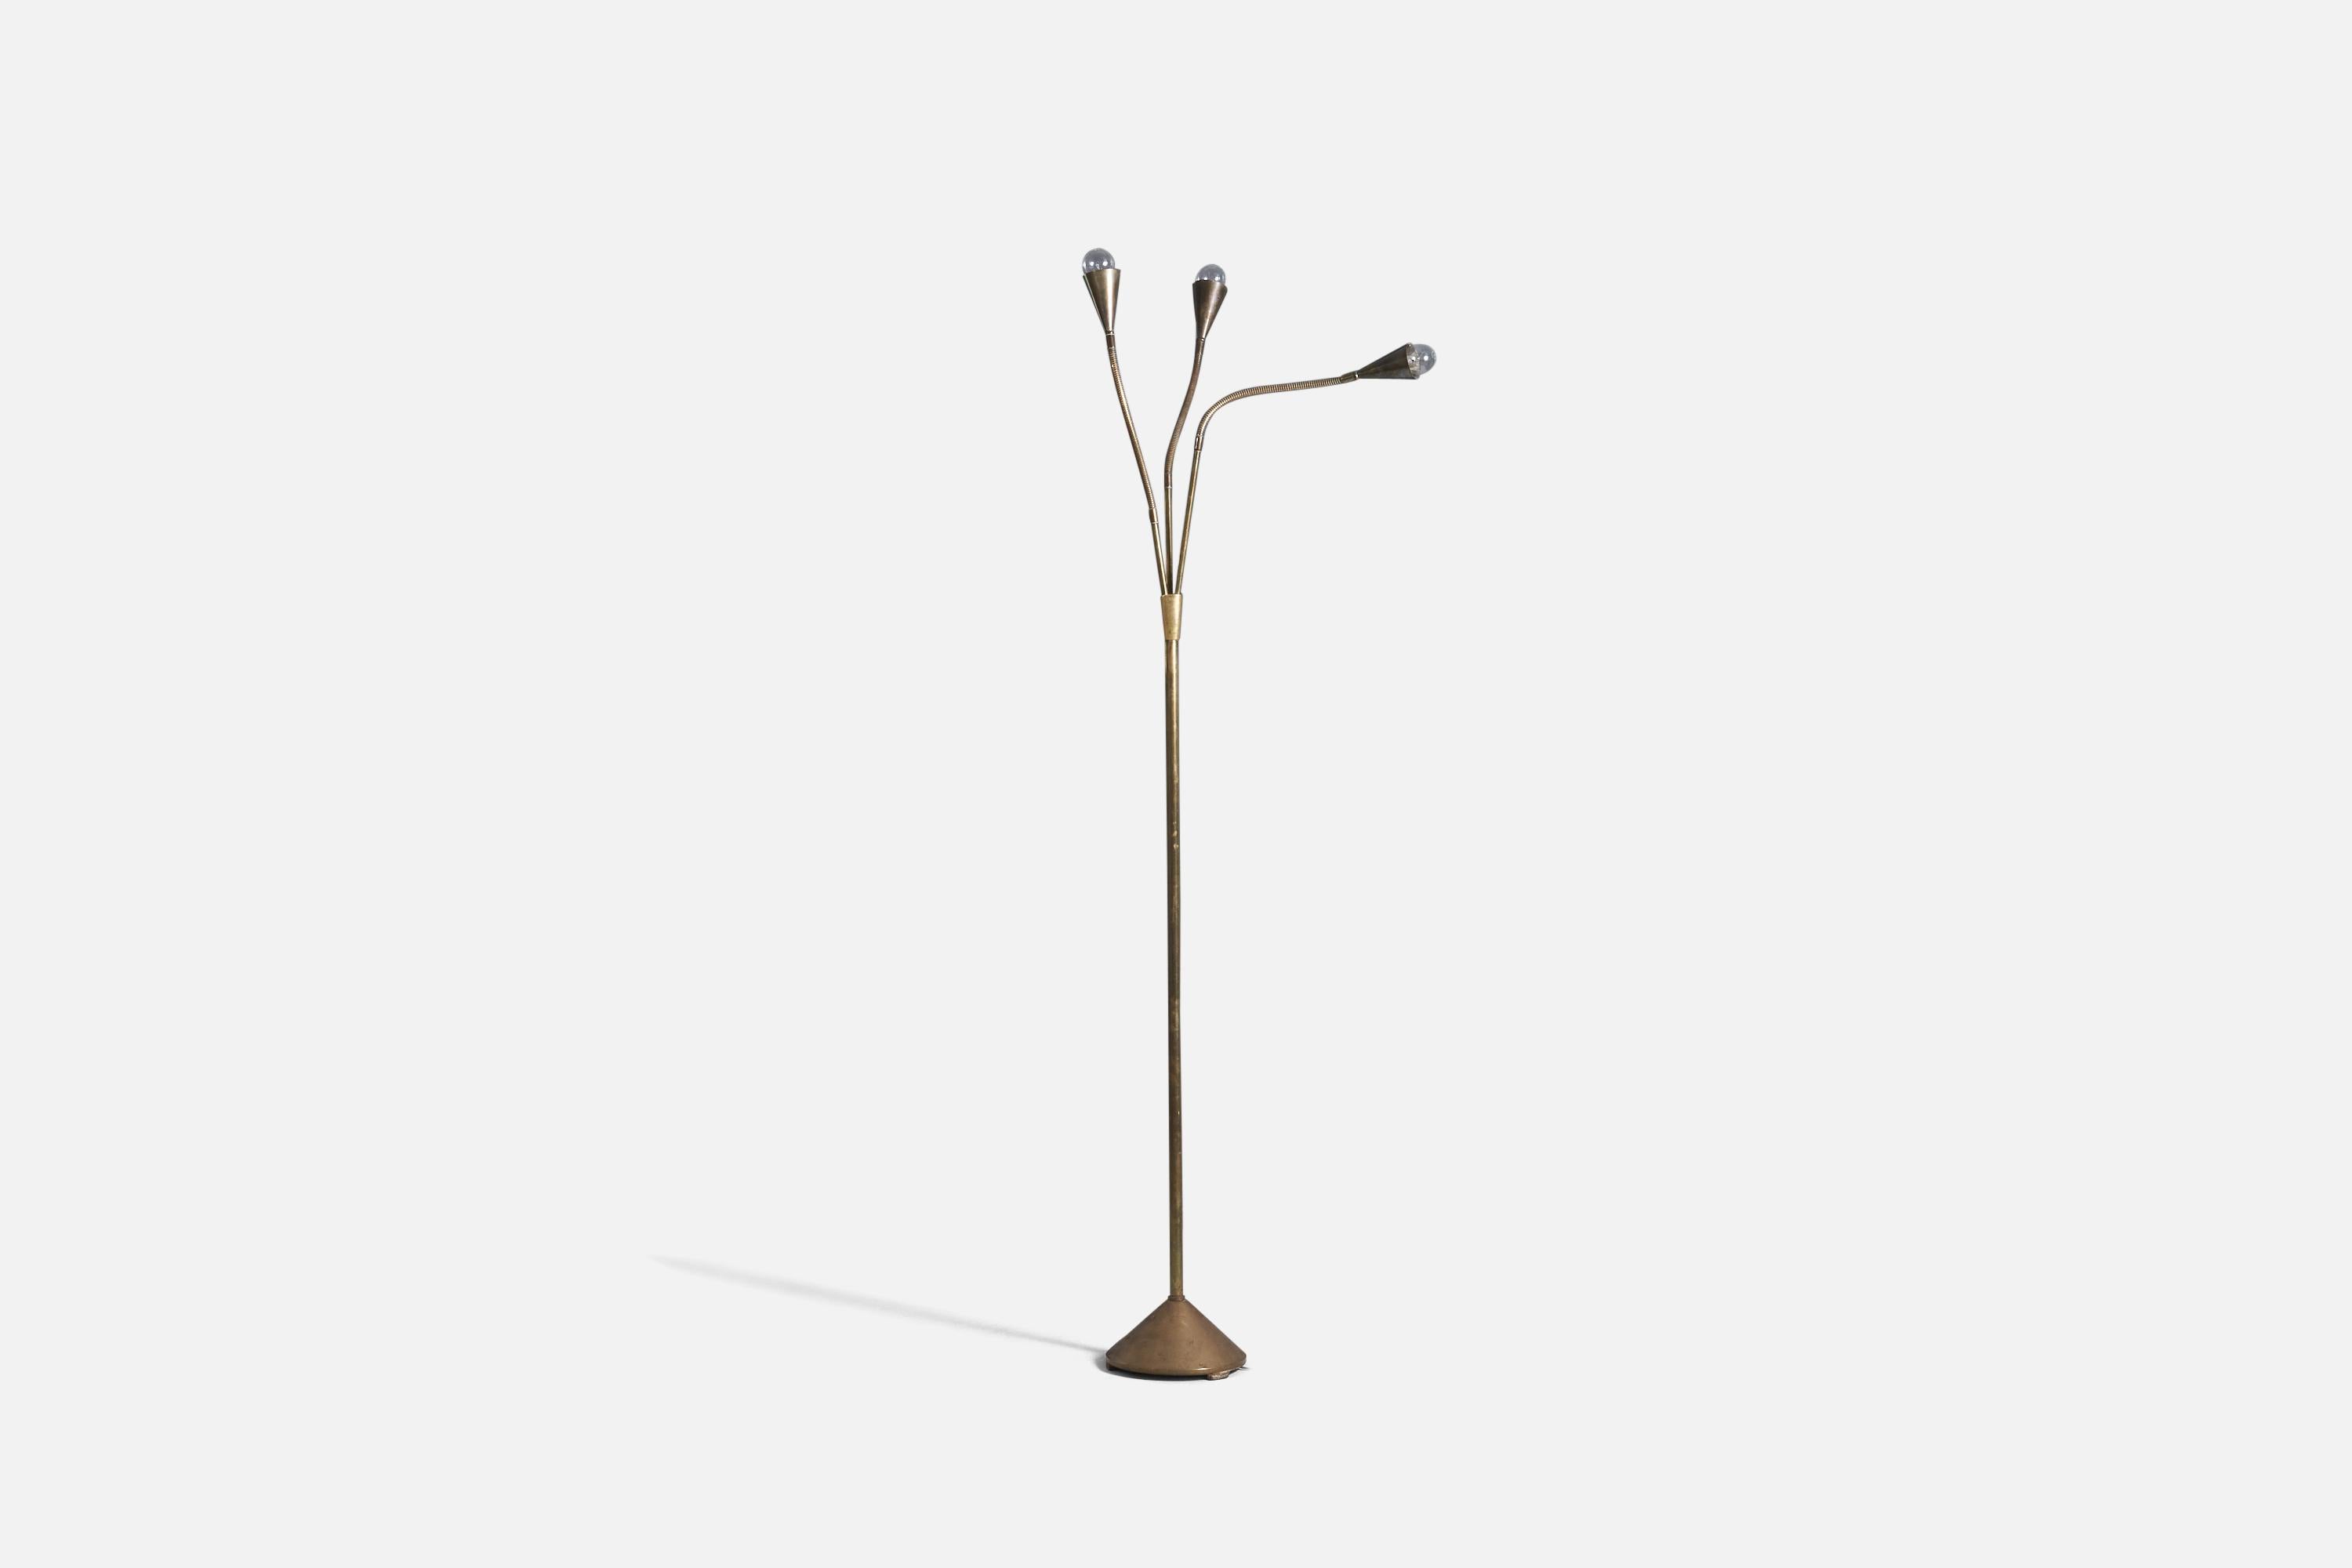 A brass, adjustable floor lamp designed and produced in Denmark, 1940s.

Variable dimensions, measured as illustrated in the first image.

Socket takes Euro base E-14bulb.

